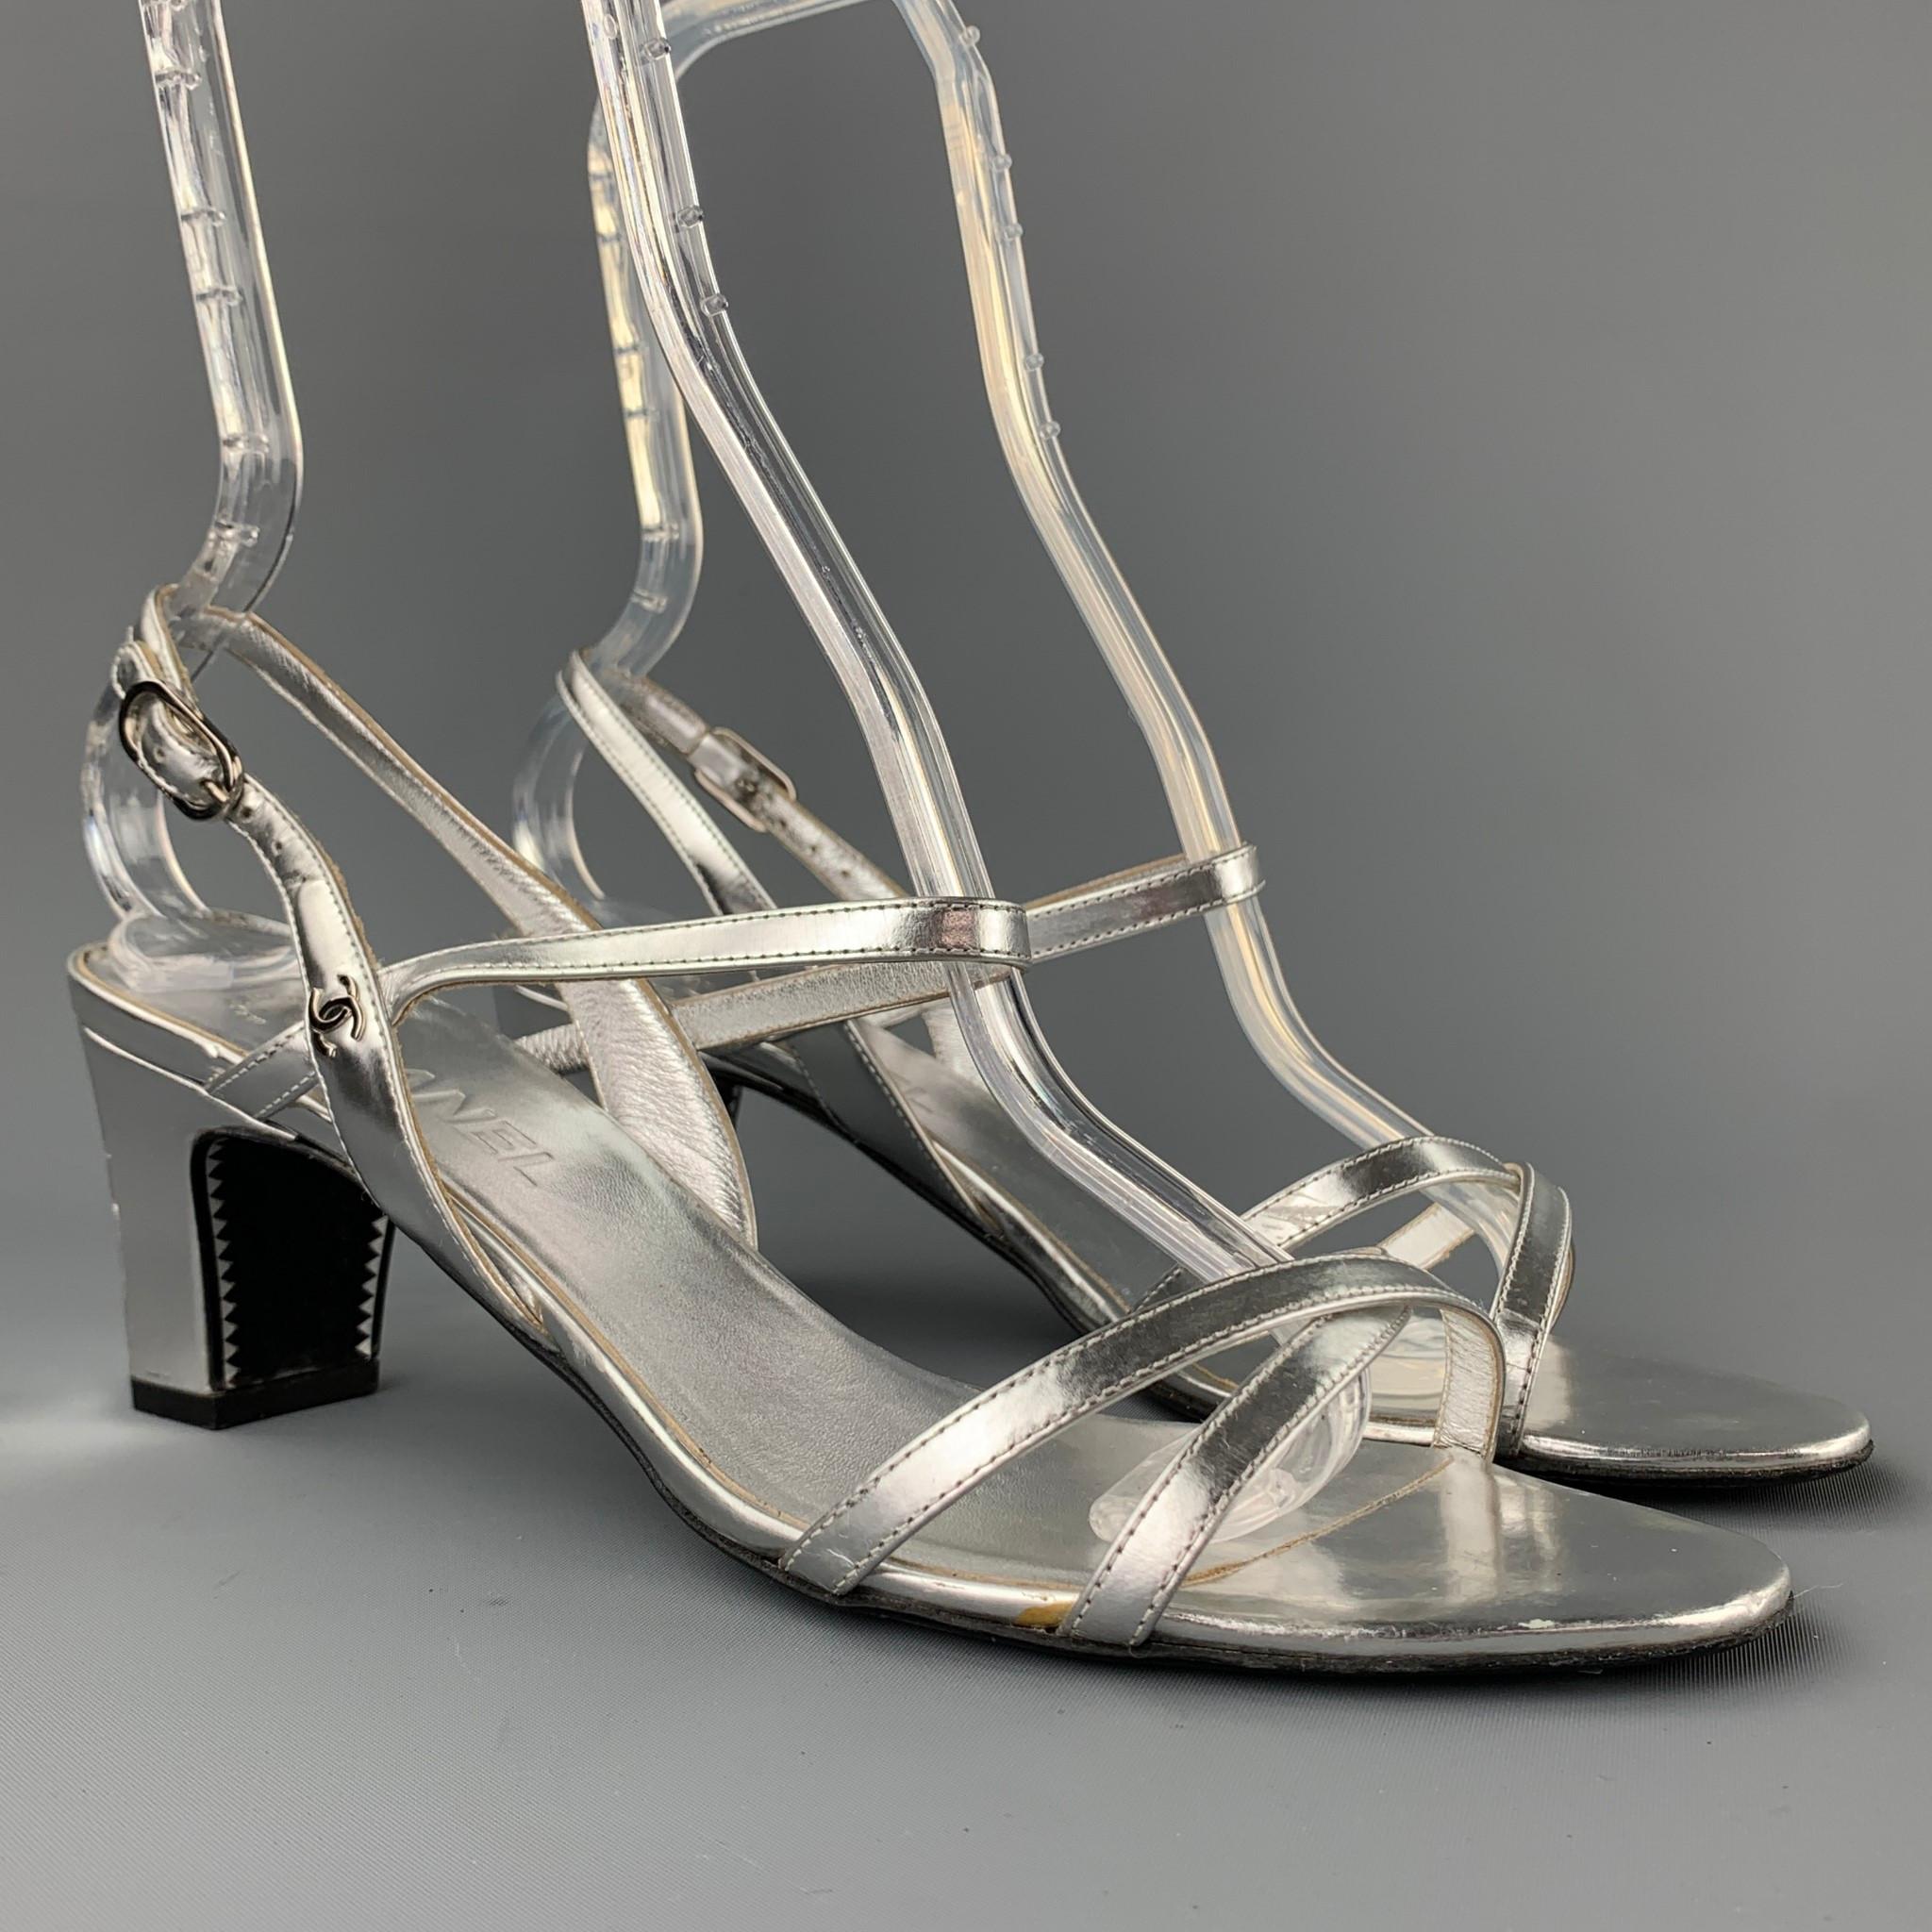 CHANEL sandals comes in a silver metallic leather featuring a strappy style, chunky heel, and a wooden sole. Moderate wear. Made in Italy.

Good Pre-Owned Condition.
Marked: EU 39.5

Measurements:

Heel: 2.5 in.